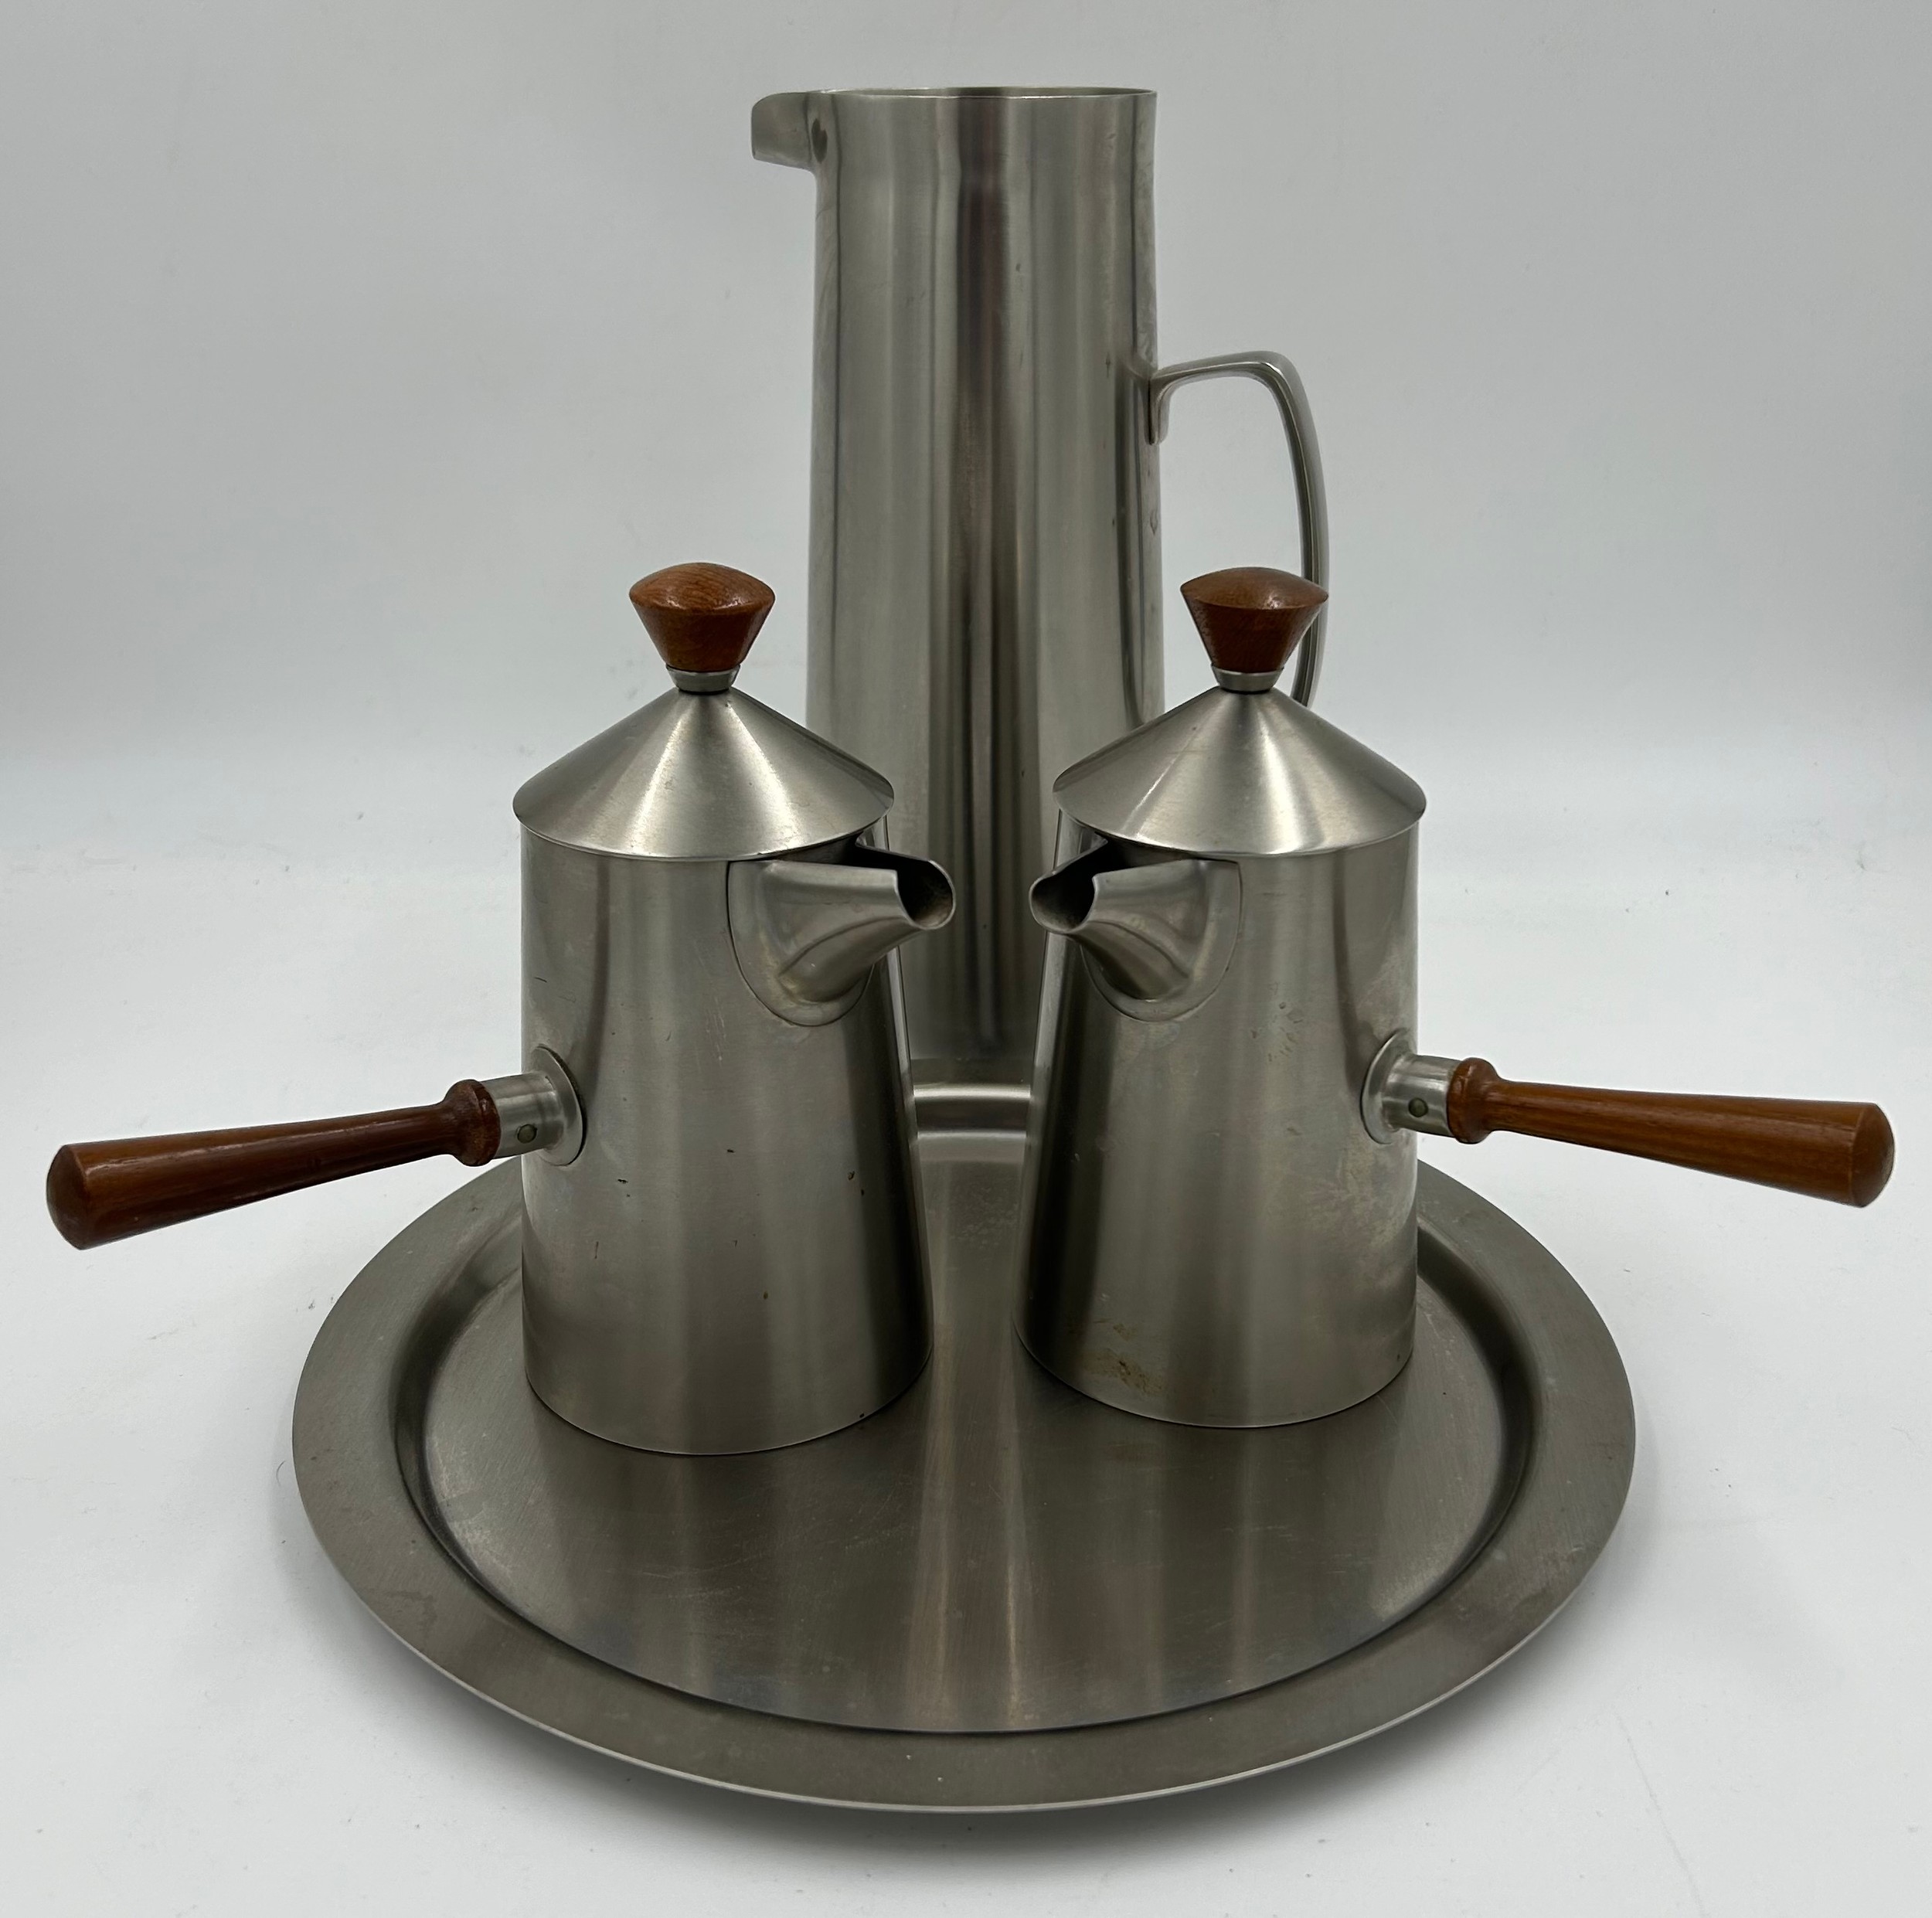 An Old Hall stainless steel Campden range coffee set designed by Robert Welch, circa 1957,